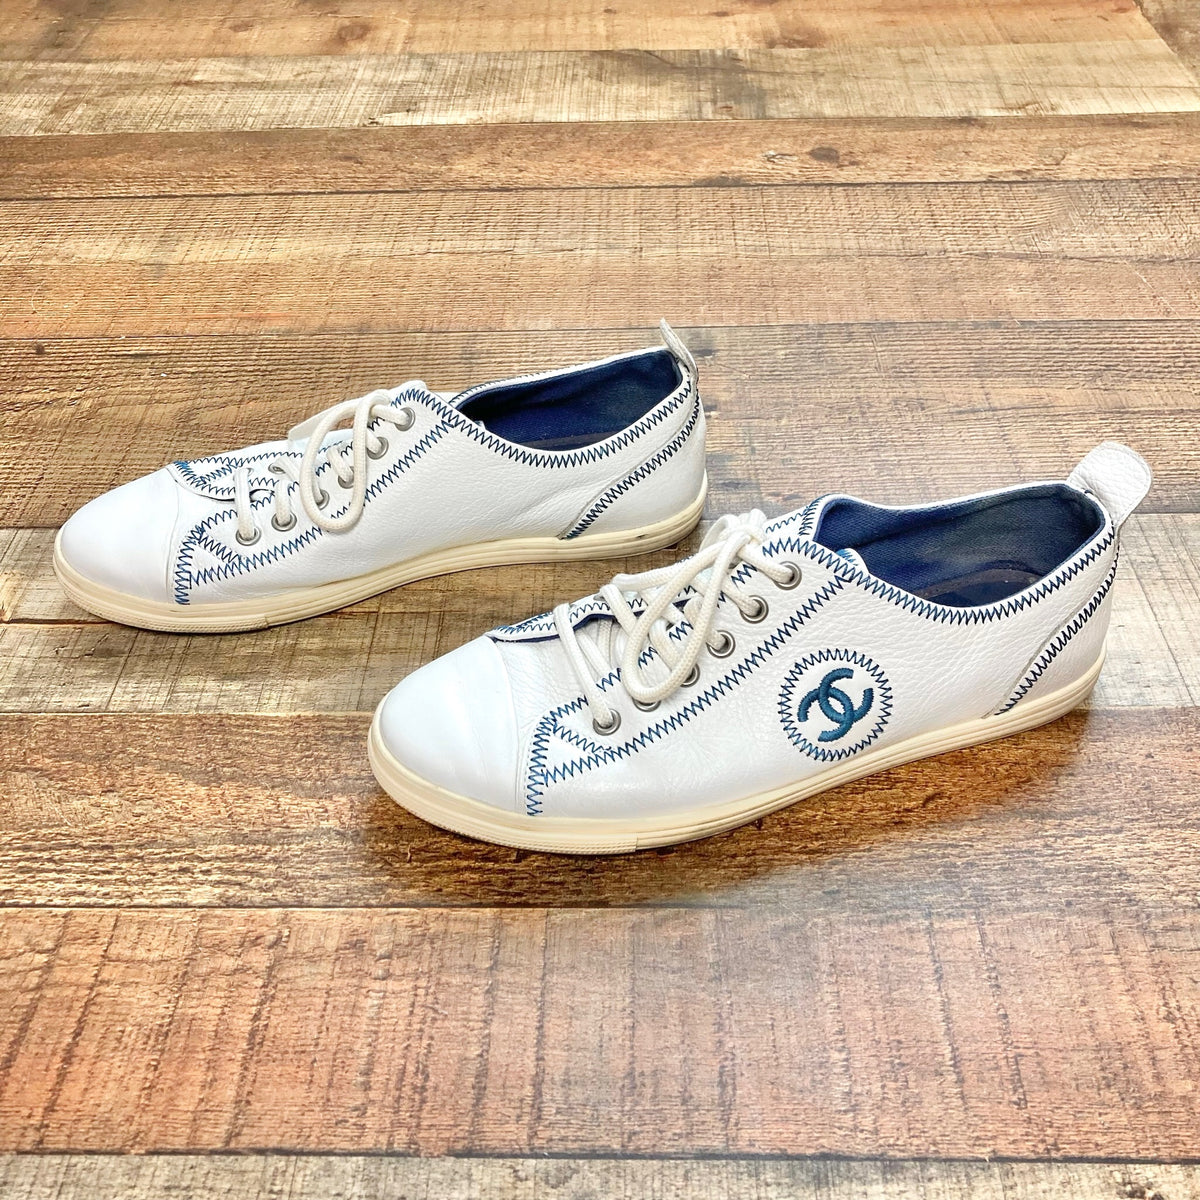 Pre-Owned Chanel White Leather Logo Trainer Sneakers- Size 39 (US 8)